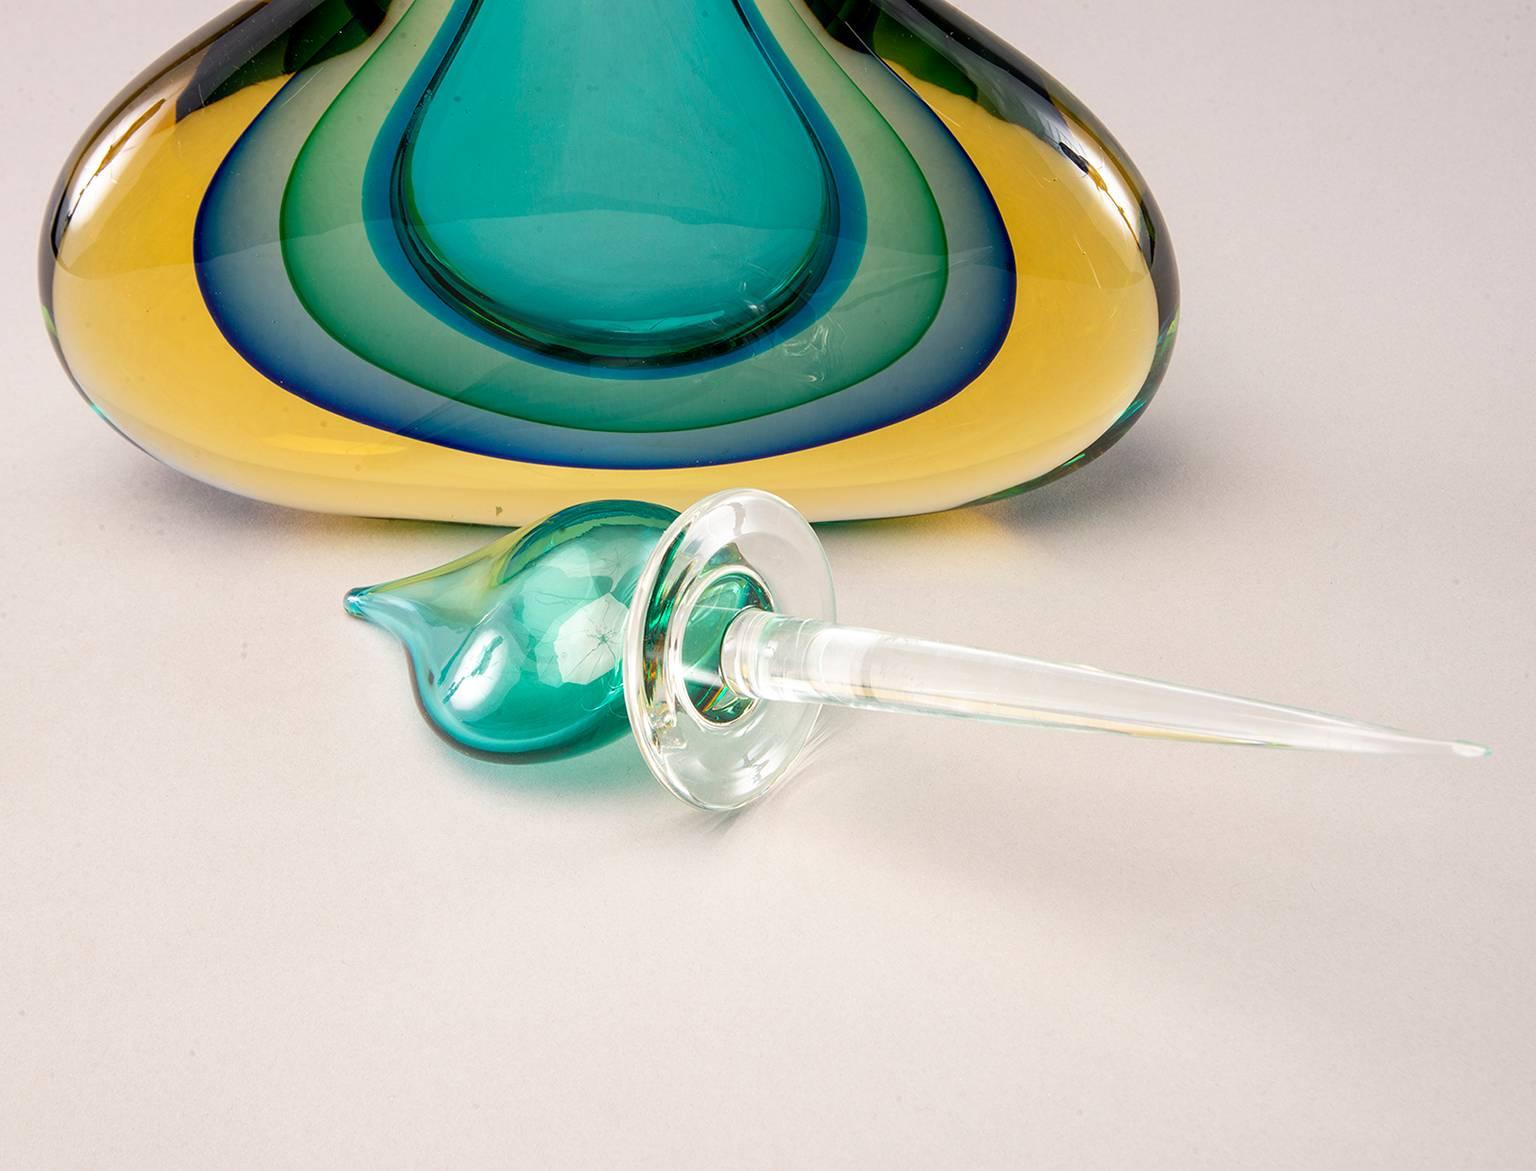 New monumental sommerso style Murano glass perfume bottle with glass stopper top in layered shades of amber, teal, blue, green and clear glass. Stunning, oversize statement piece. New with no flaws found. Unknown/unmarked Murano maker from our